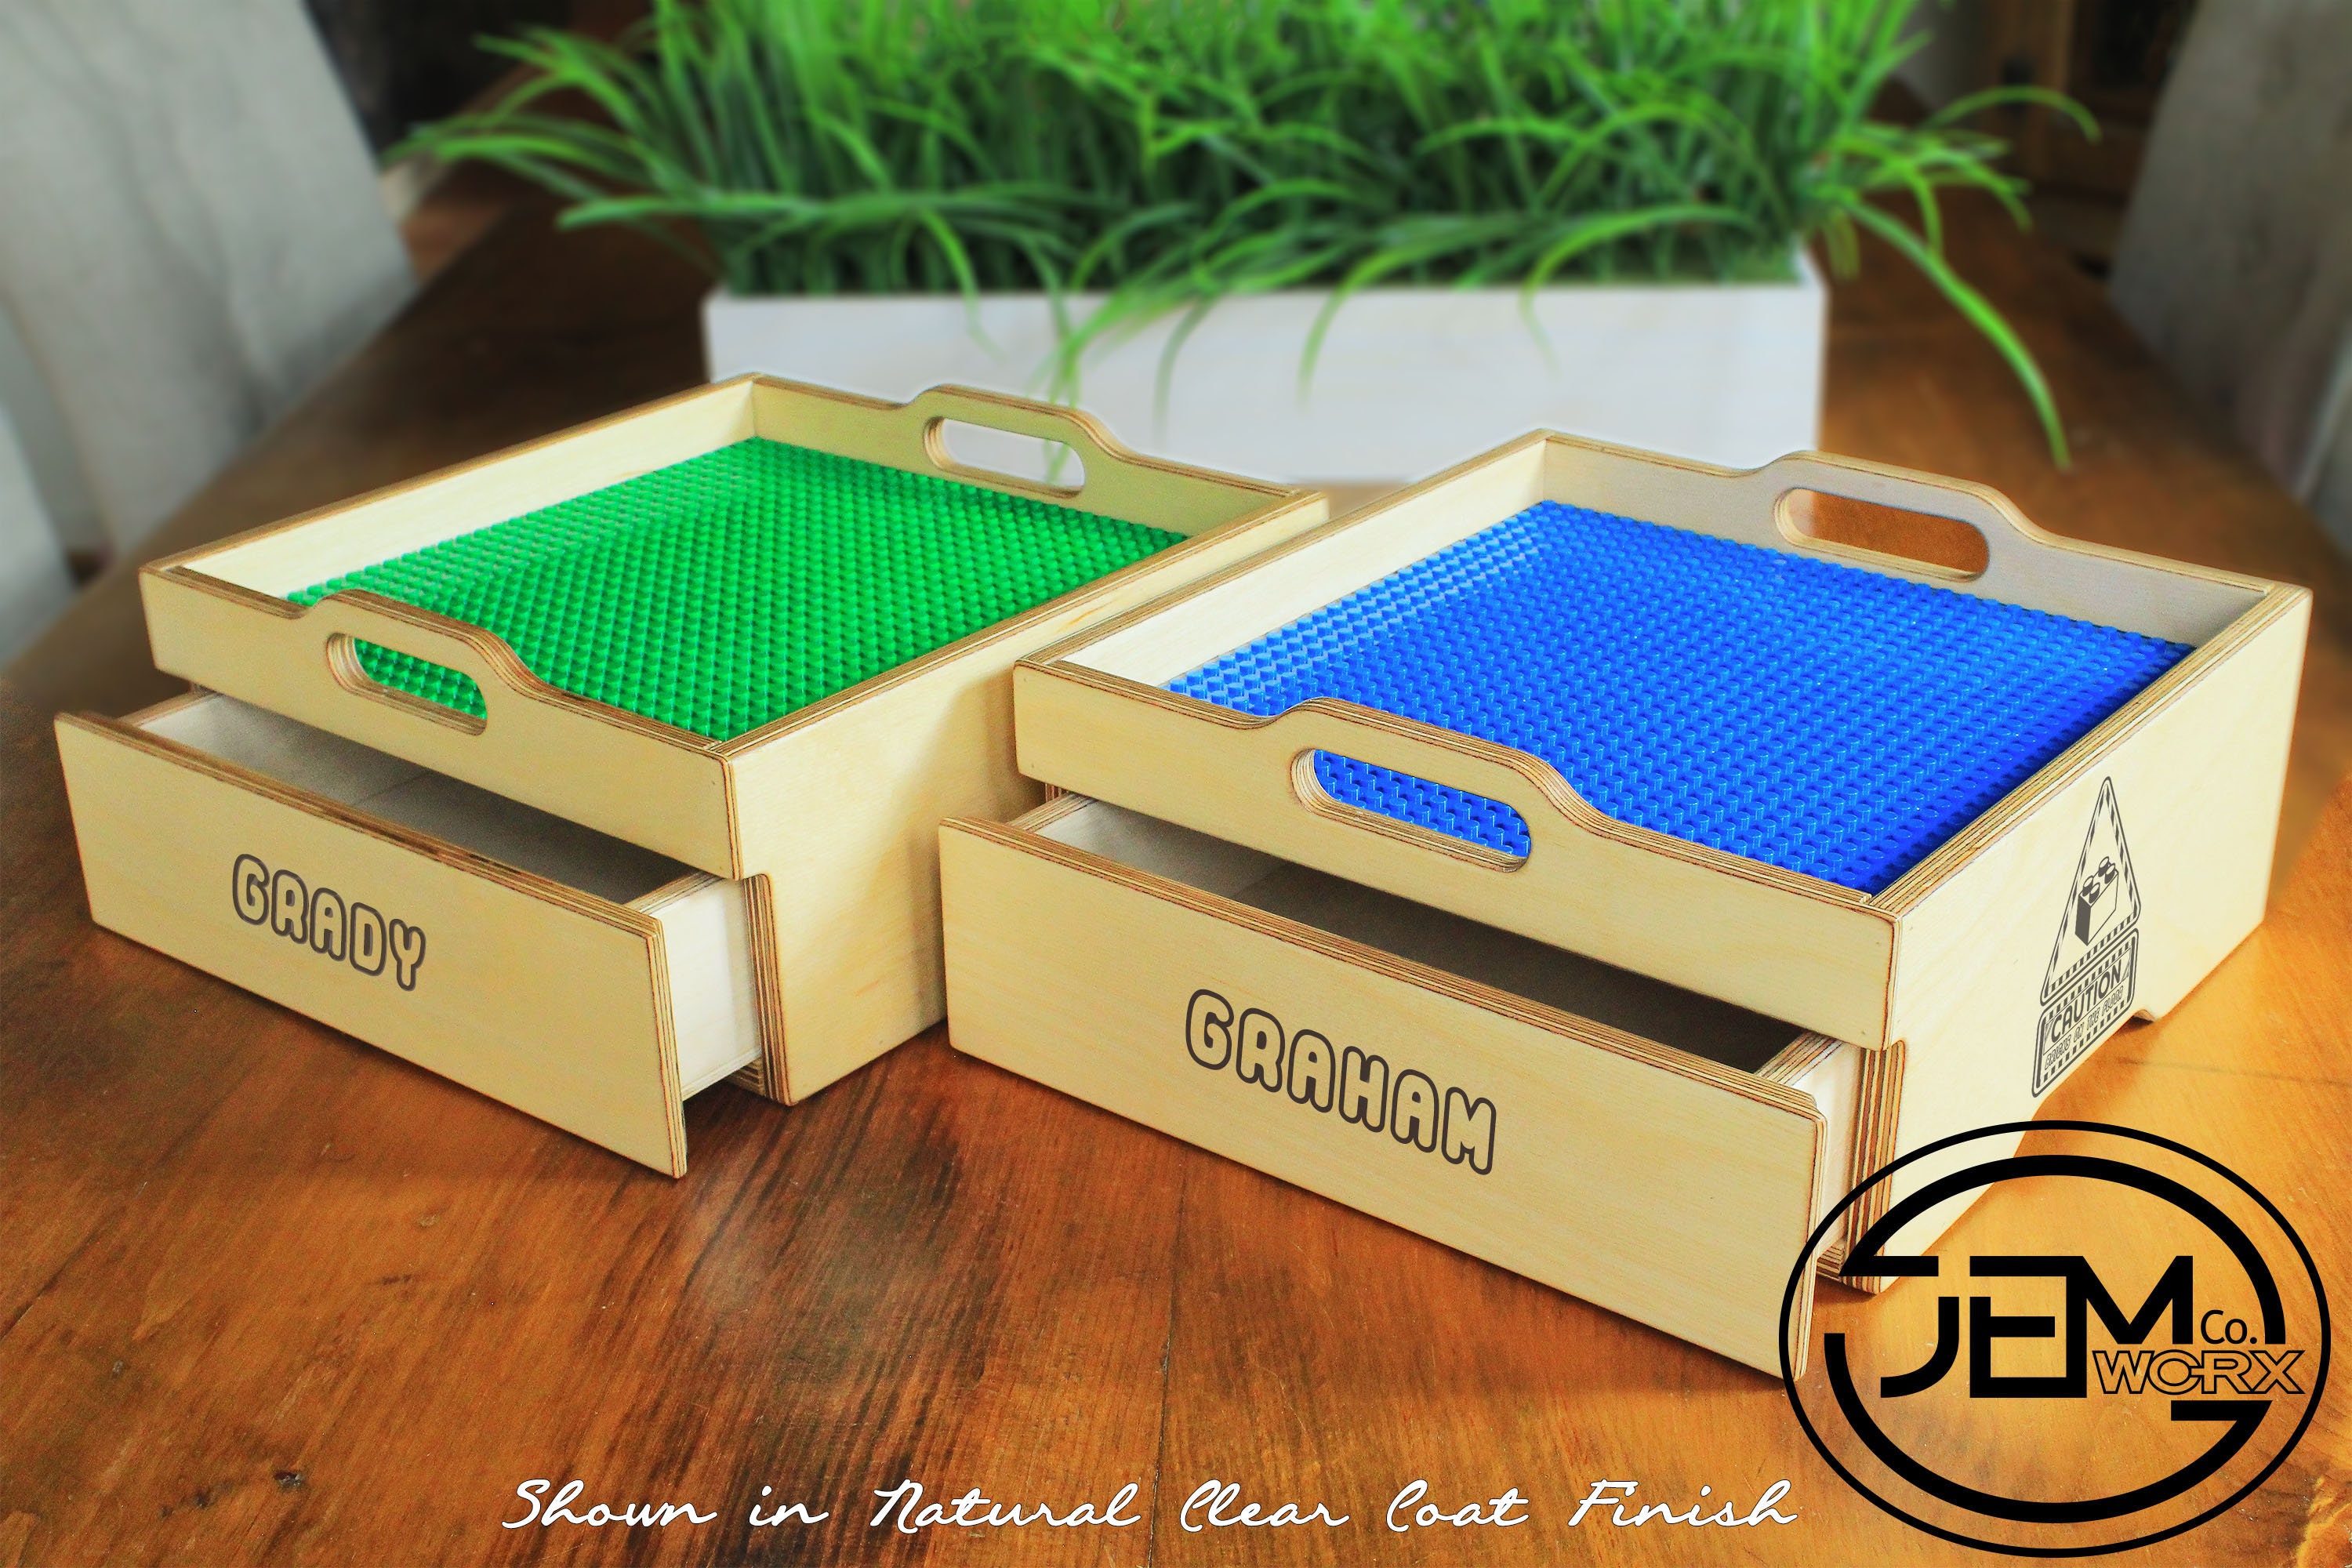 Compatible Lego® Gift, Personalized Gift, Brick Tray With Drawer